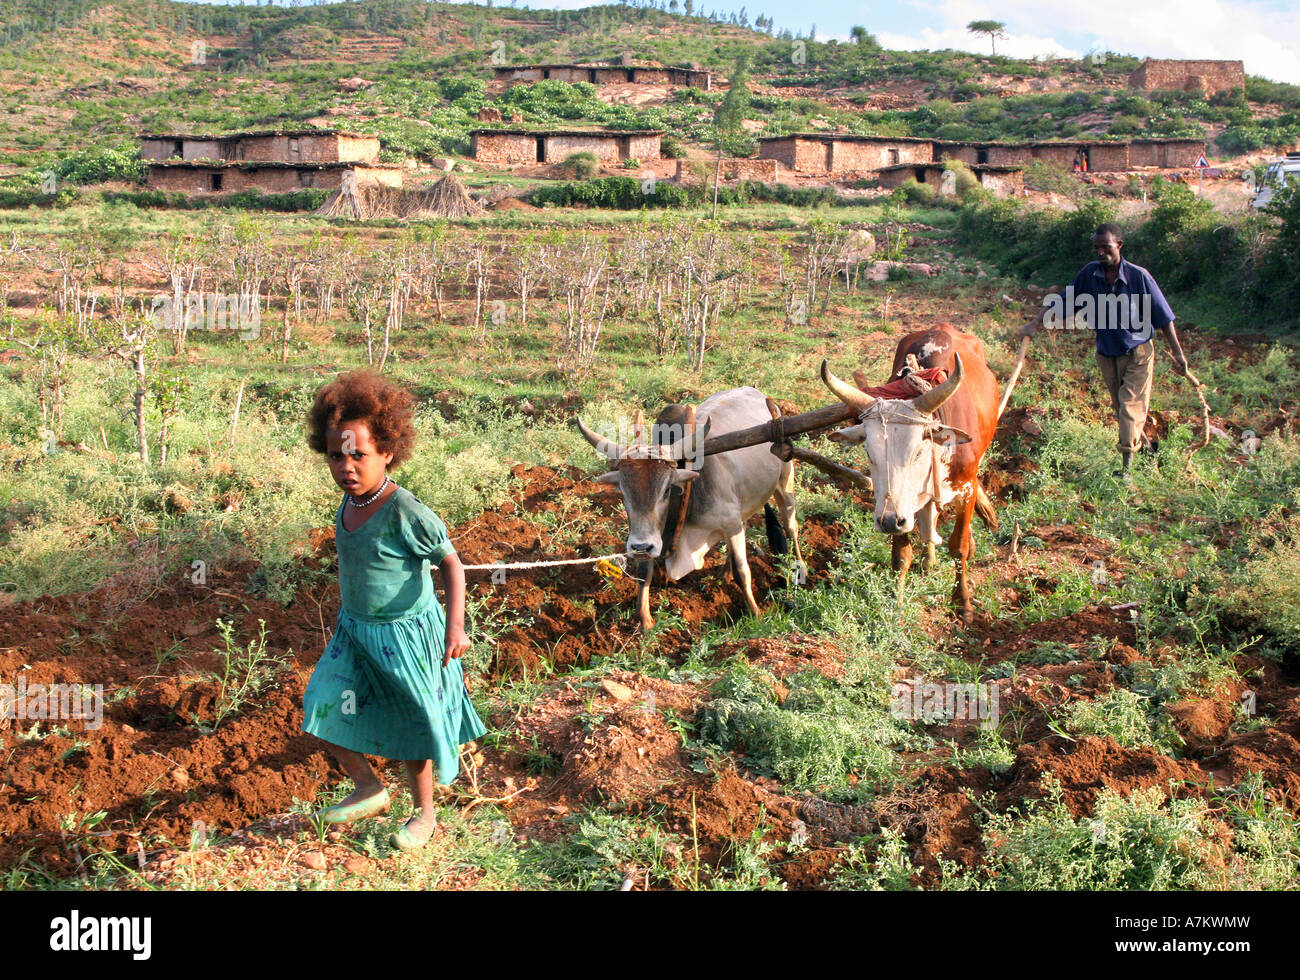 Ethiopia - a girl leads cattles in plowing her families farmland Stock Photo